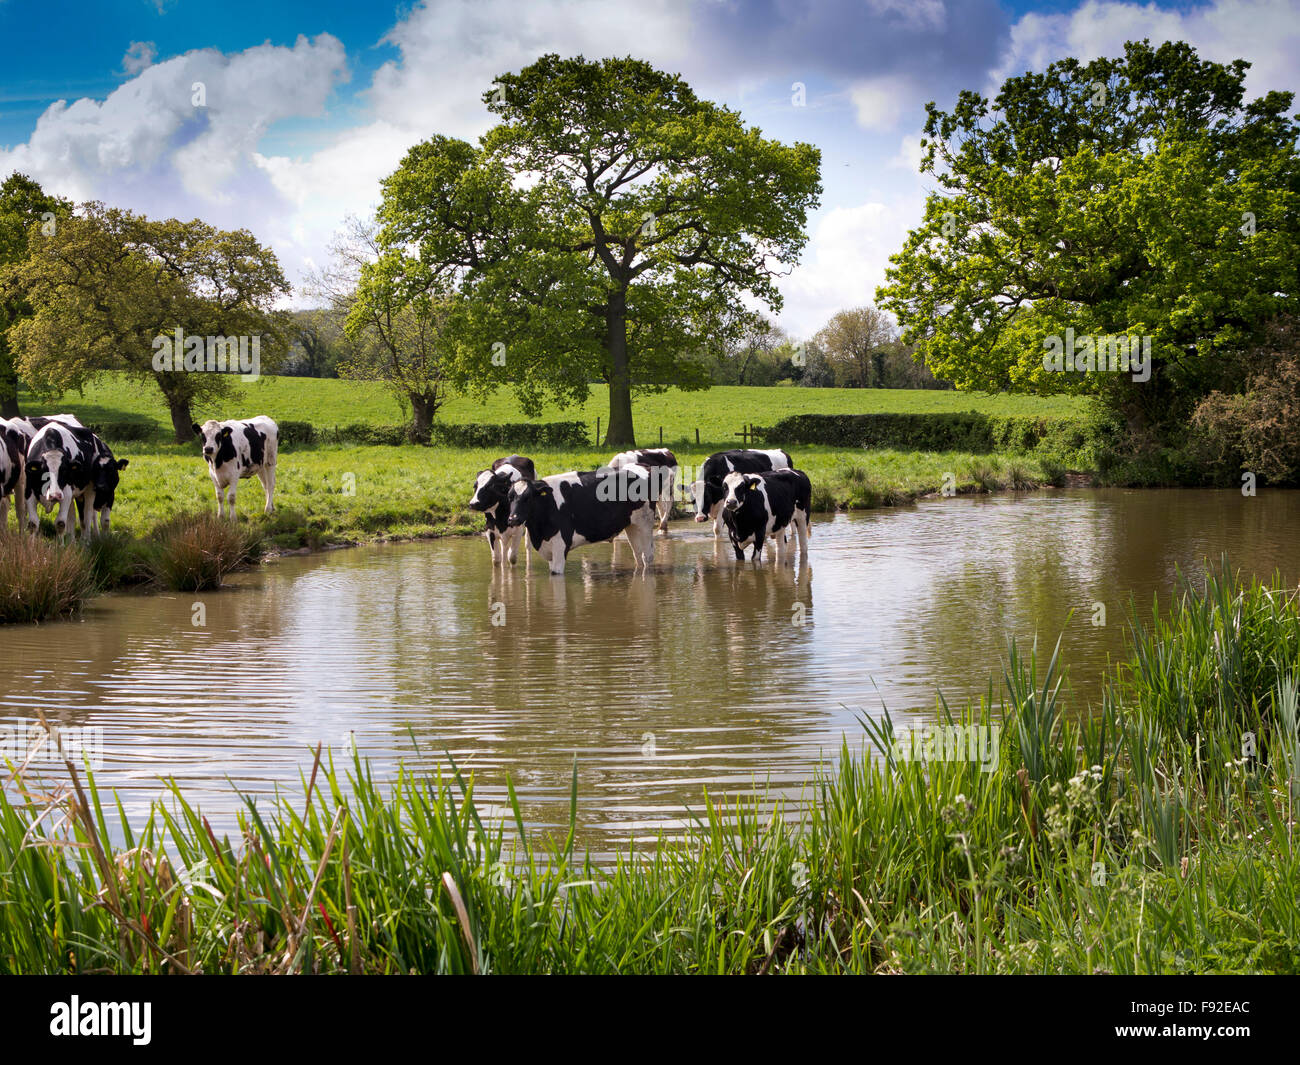 UK, England, Cheshire, Astbury, Fresian dairy cattle cooling off in Macclesfield Canal during hot weather Stock Photo